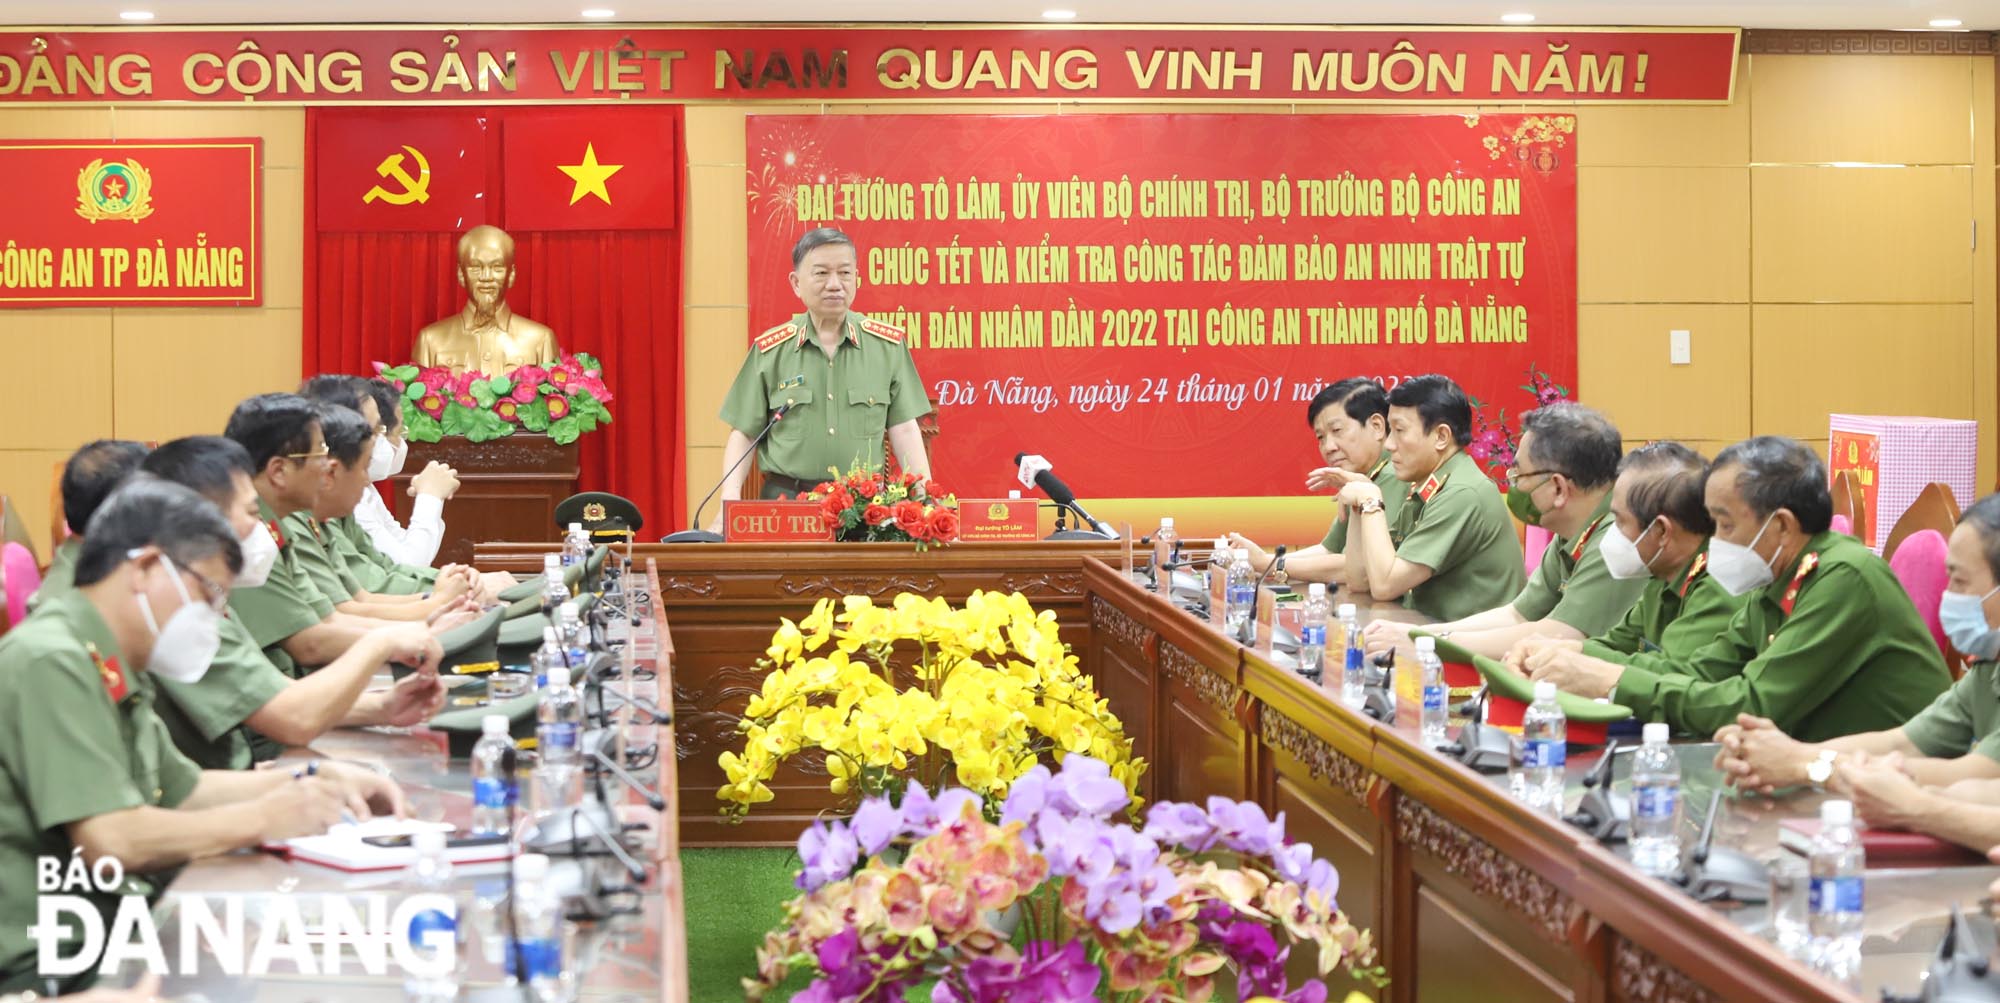 General To Lam delivers a directive speech during his visit to the Da Nang Department of Police, January 25, 2022. Photo: NGOC PHU